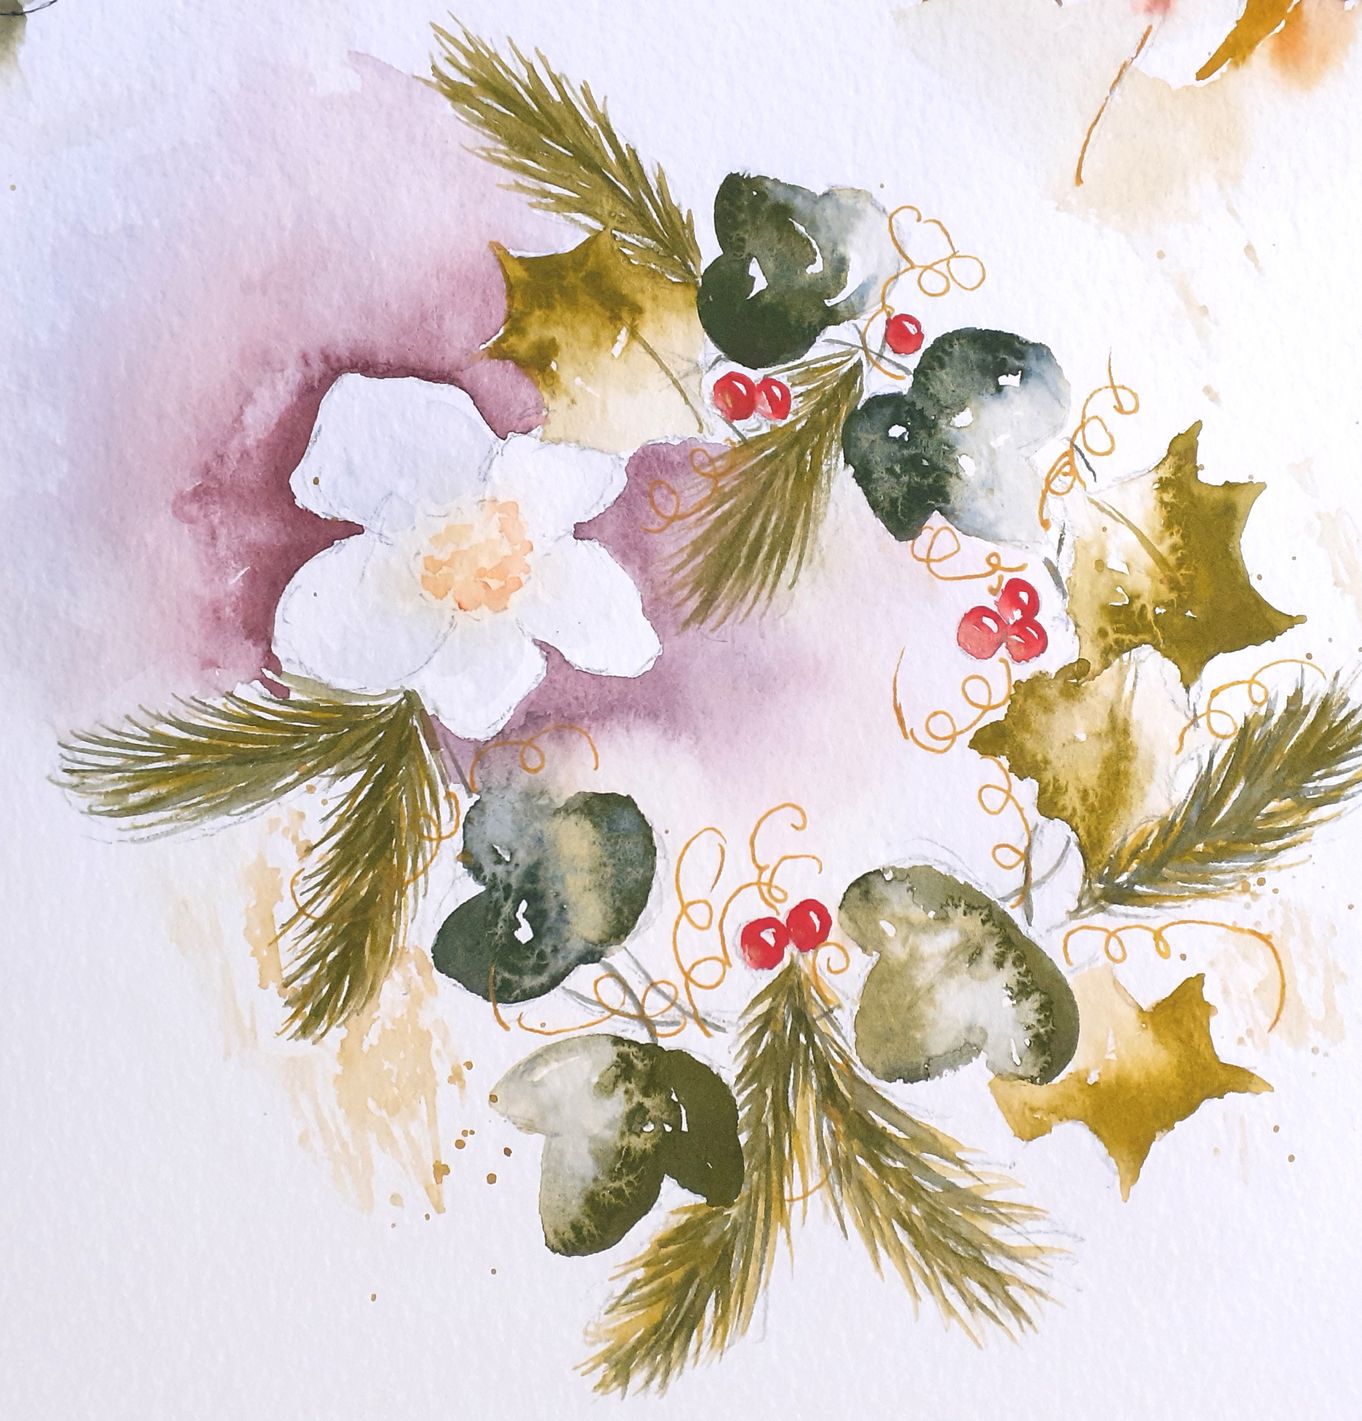 Loose Botanicals in Watercolours for Christmas ... with Lyn Evans